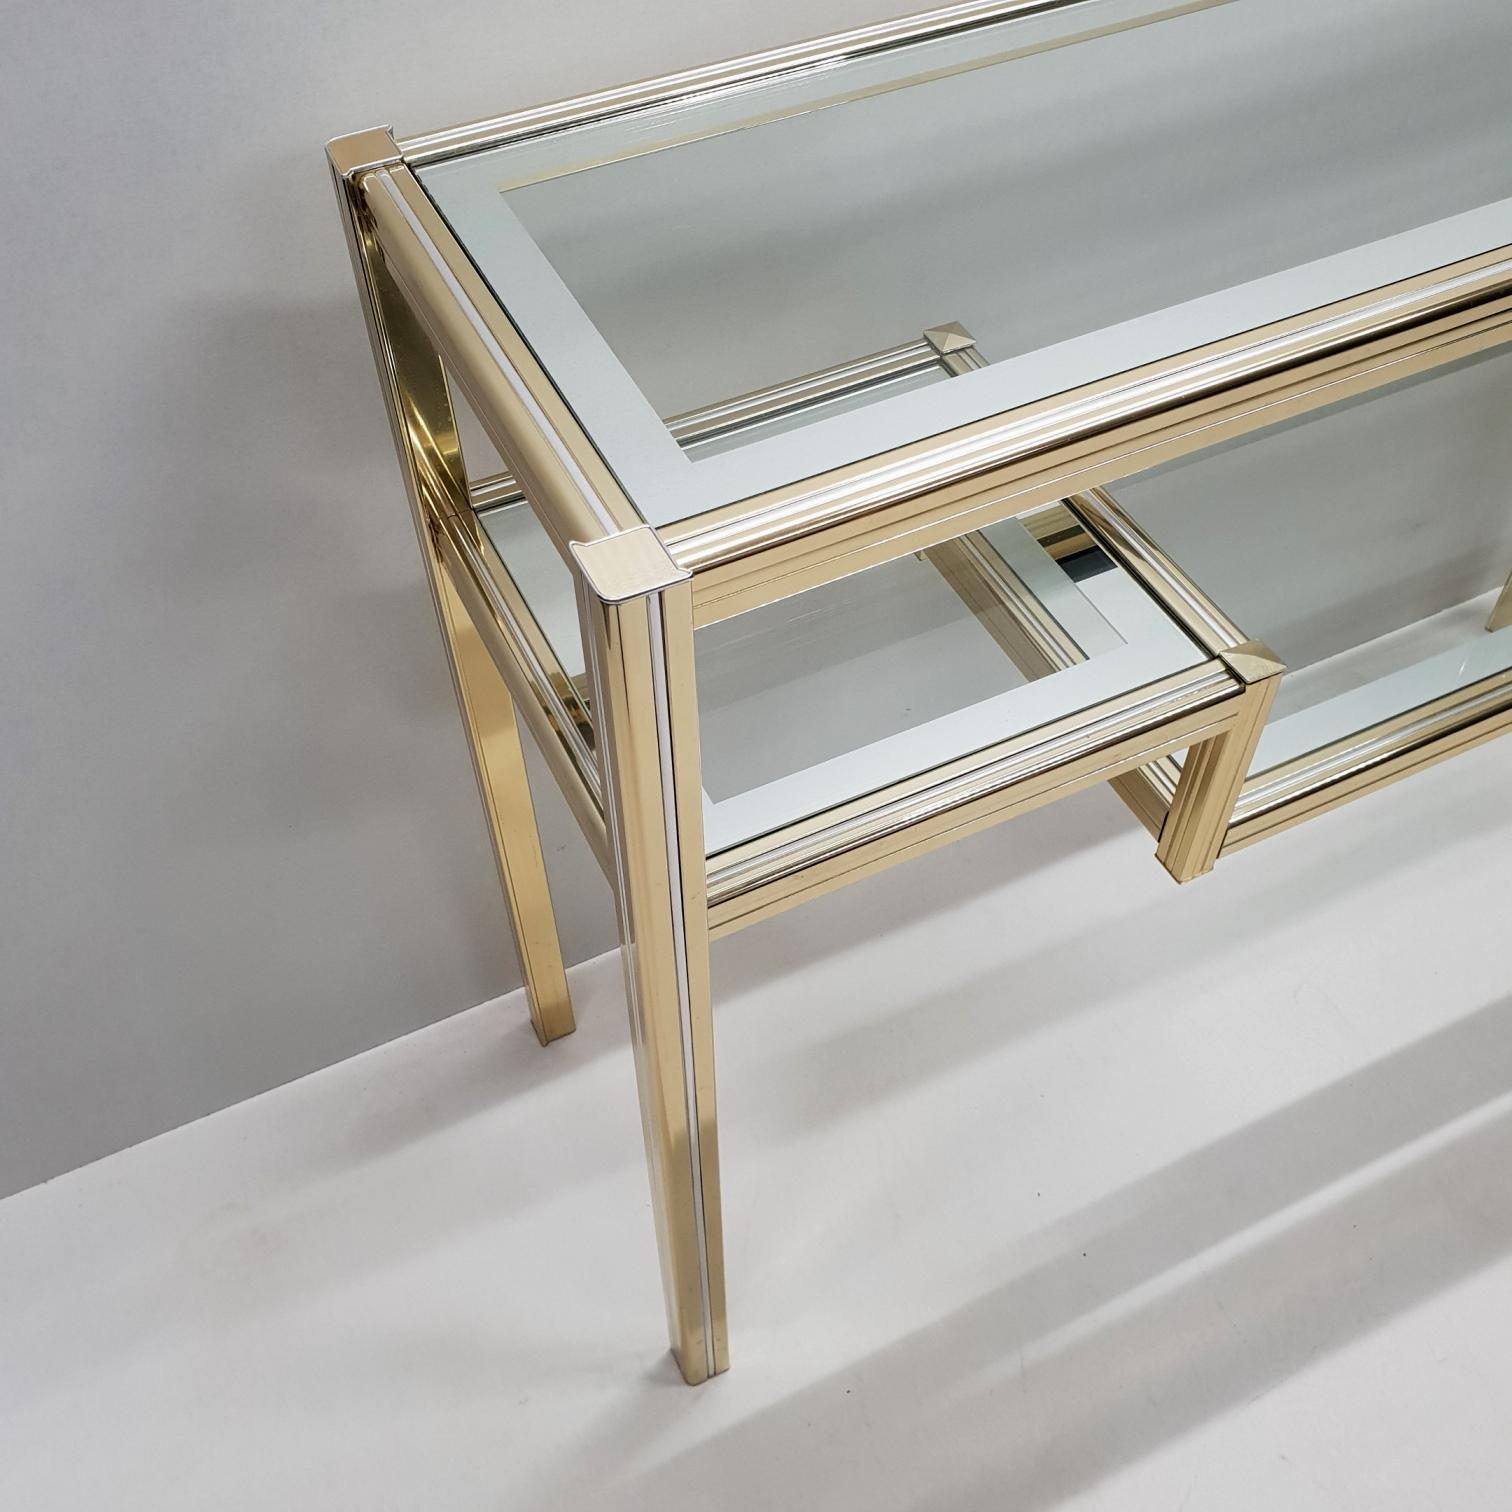 Vintage brass and glass 3-tier console table.
In style of Pierre Vandel, 1980s.